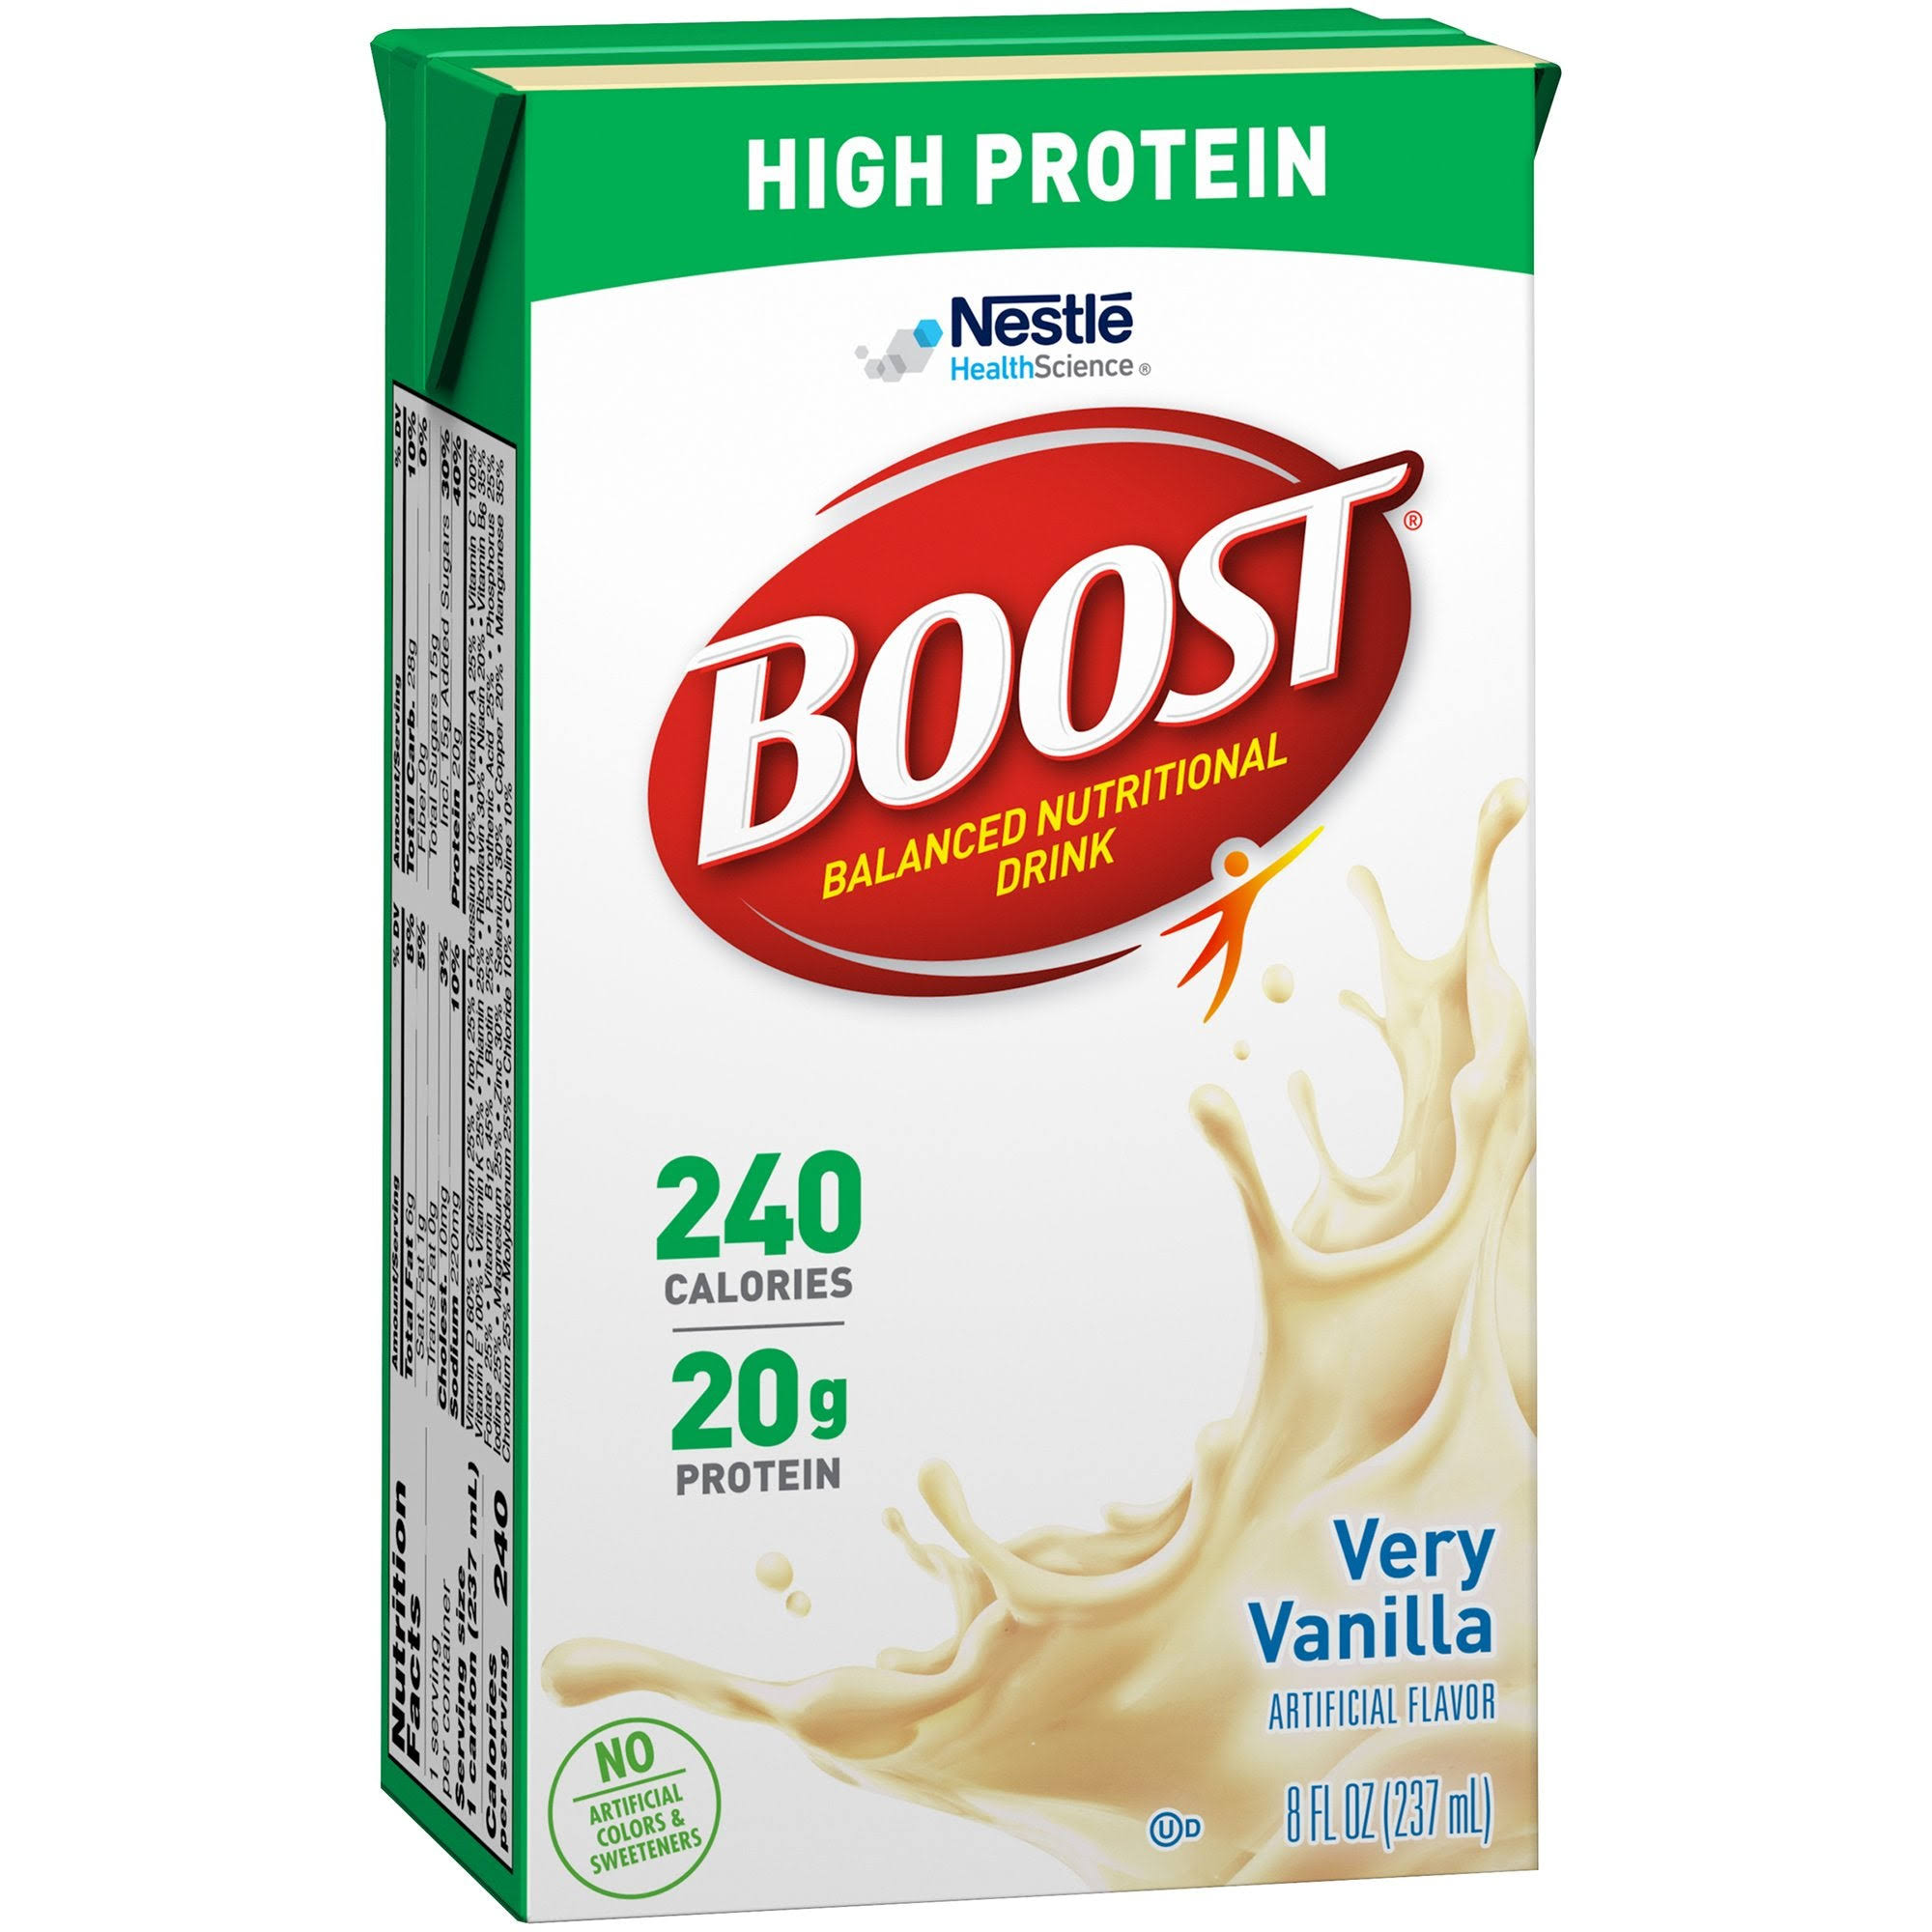 Boost Nutritional High Protein Energy Drink - Very Vanilla, 8oz